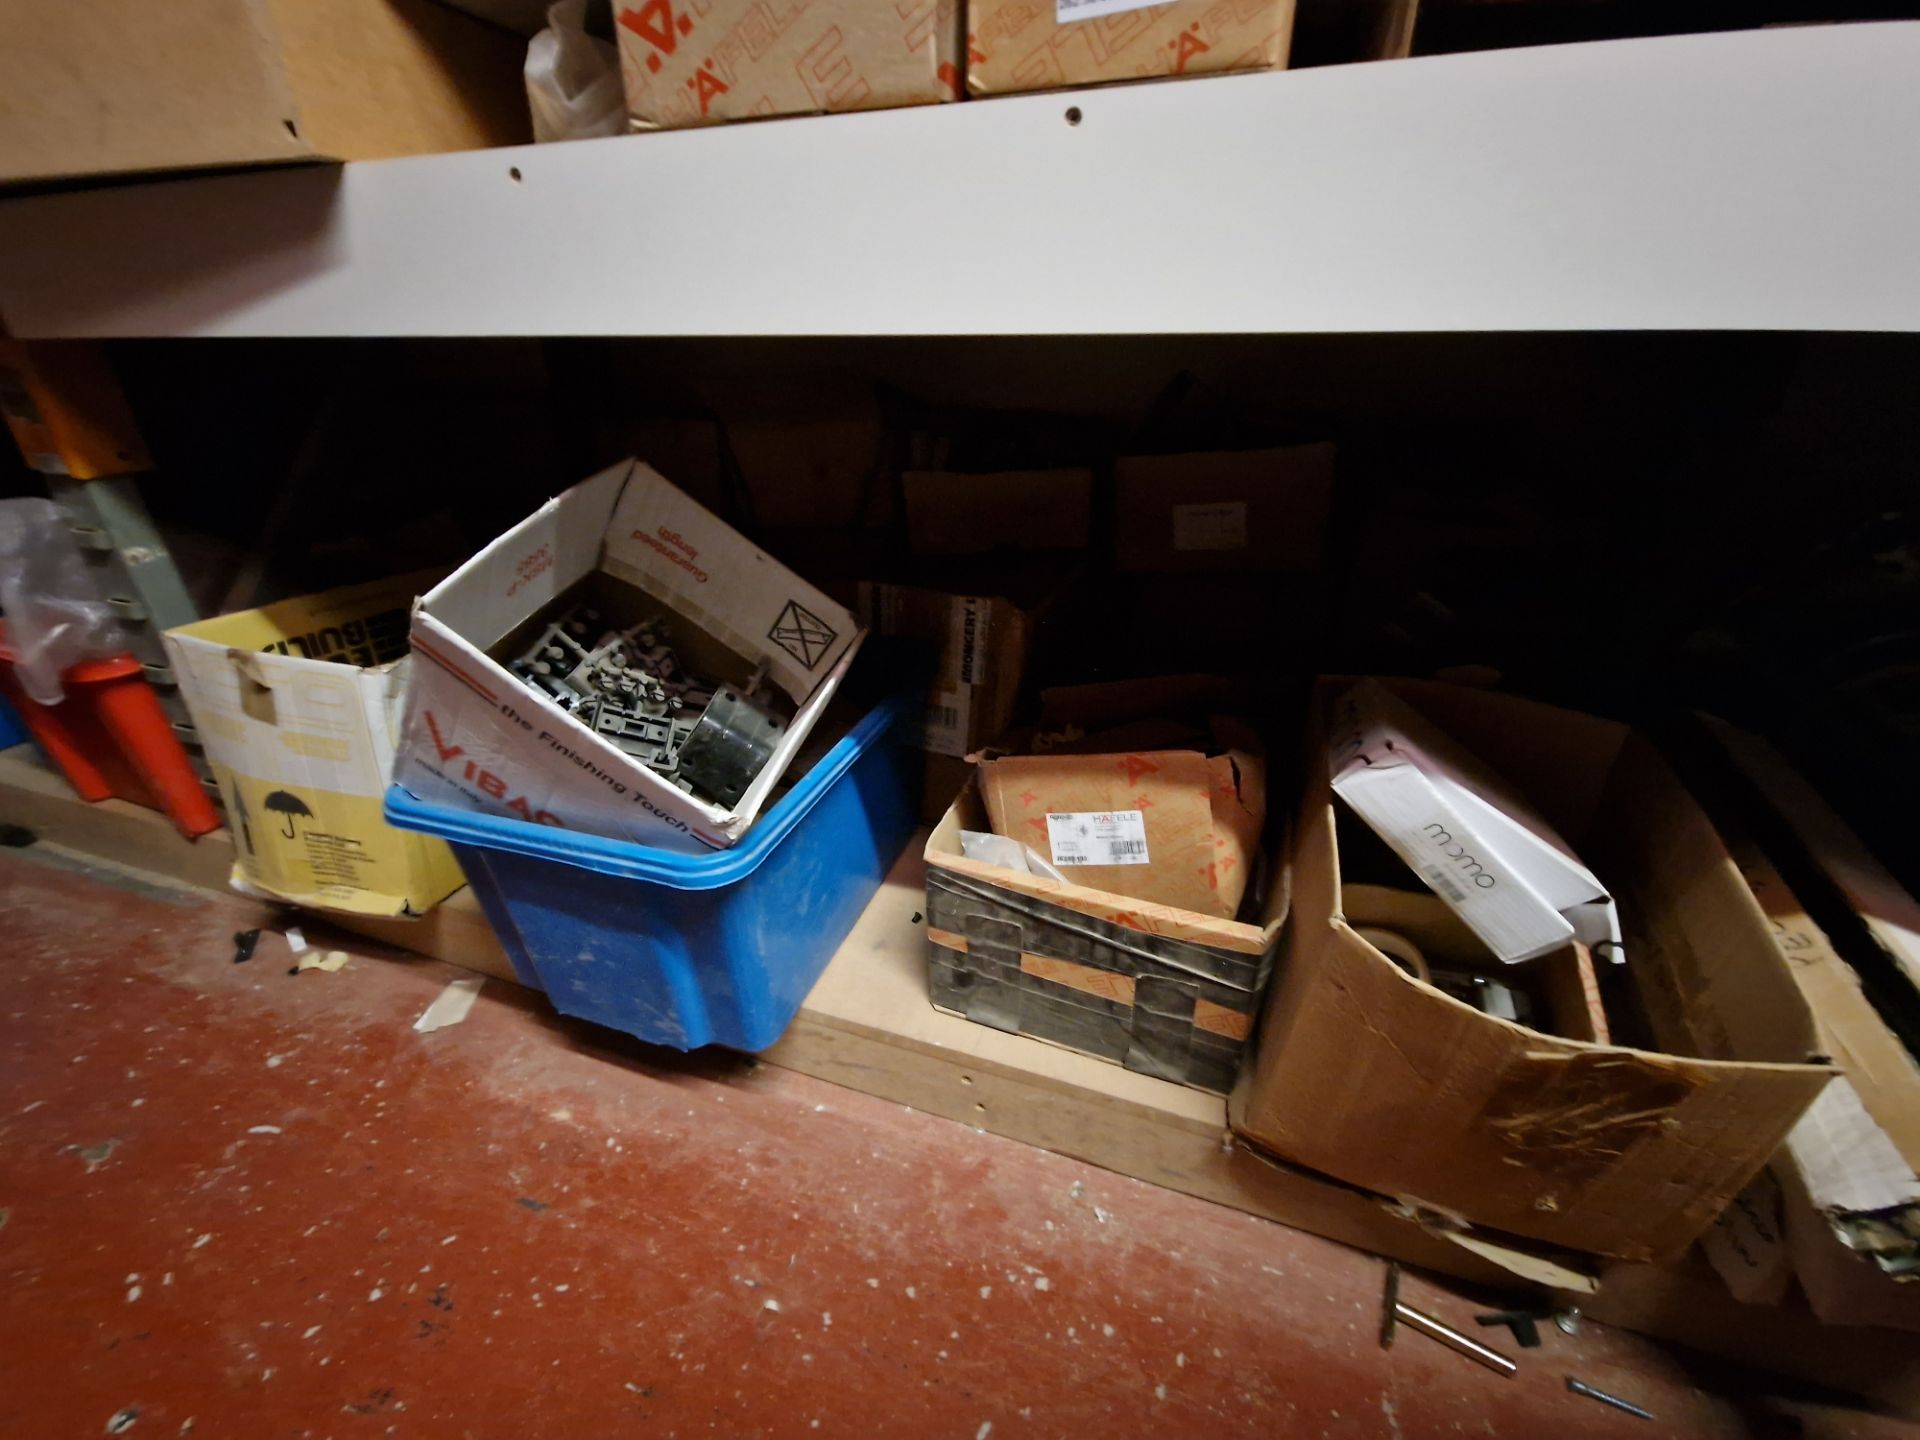 Contents to One Bay of Racking, including Fixtures, Fittings, Bolts, Drawer Runners, Bar Legs, - Image 8 of 32